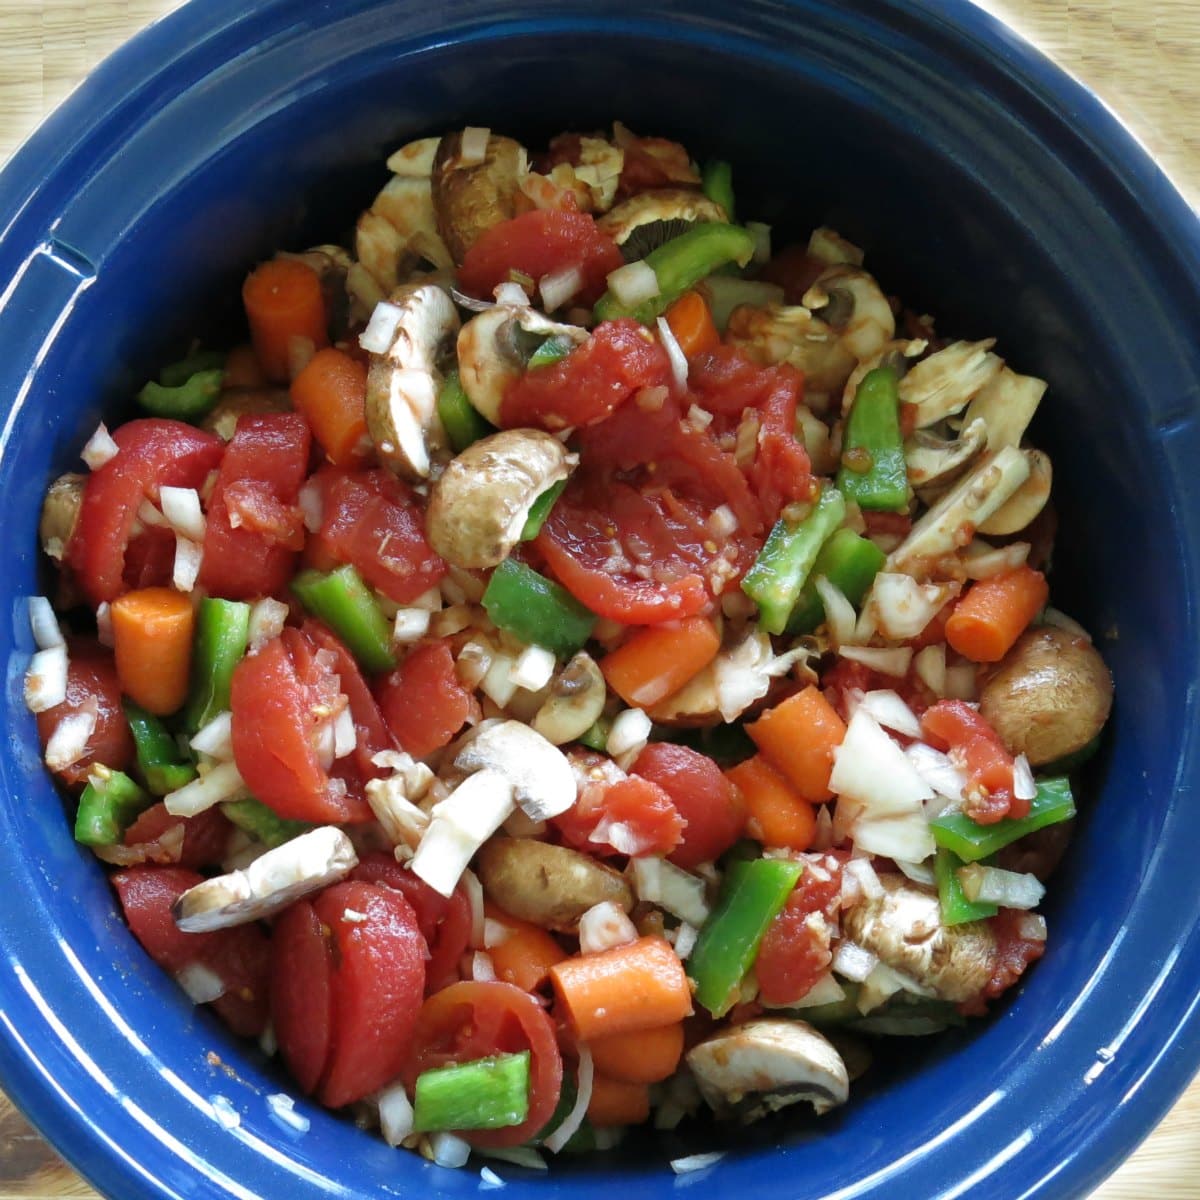 Slow cooker filled with vegetables, stewed tomatoes and chicken.